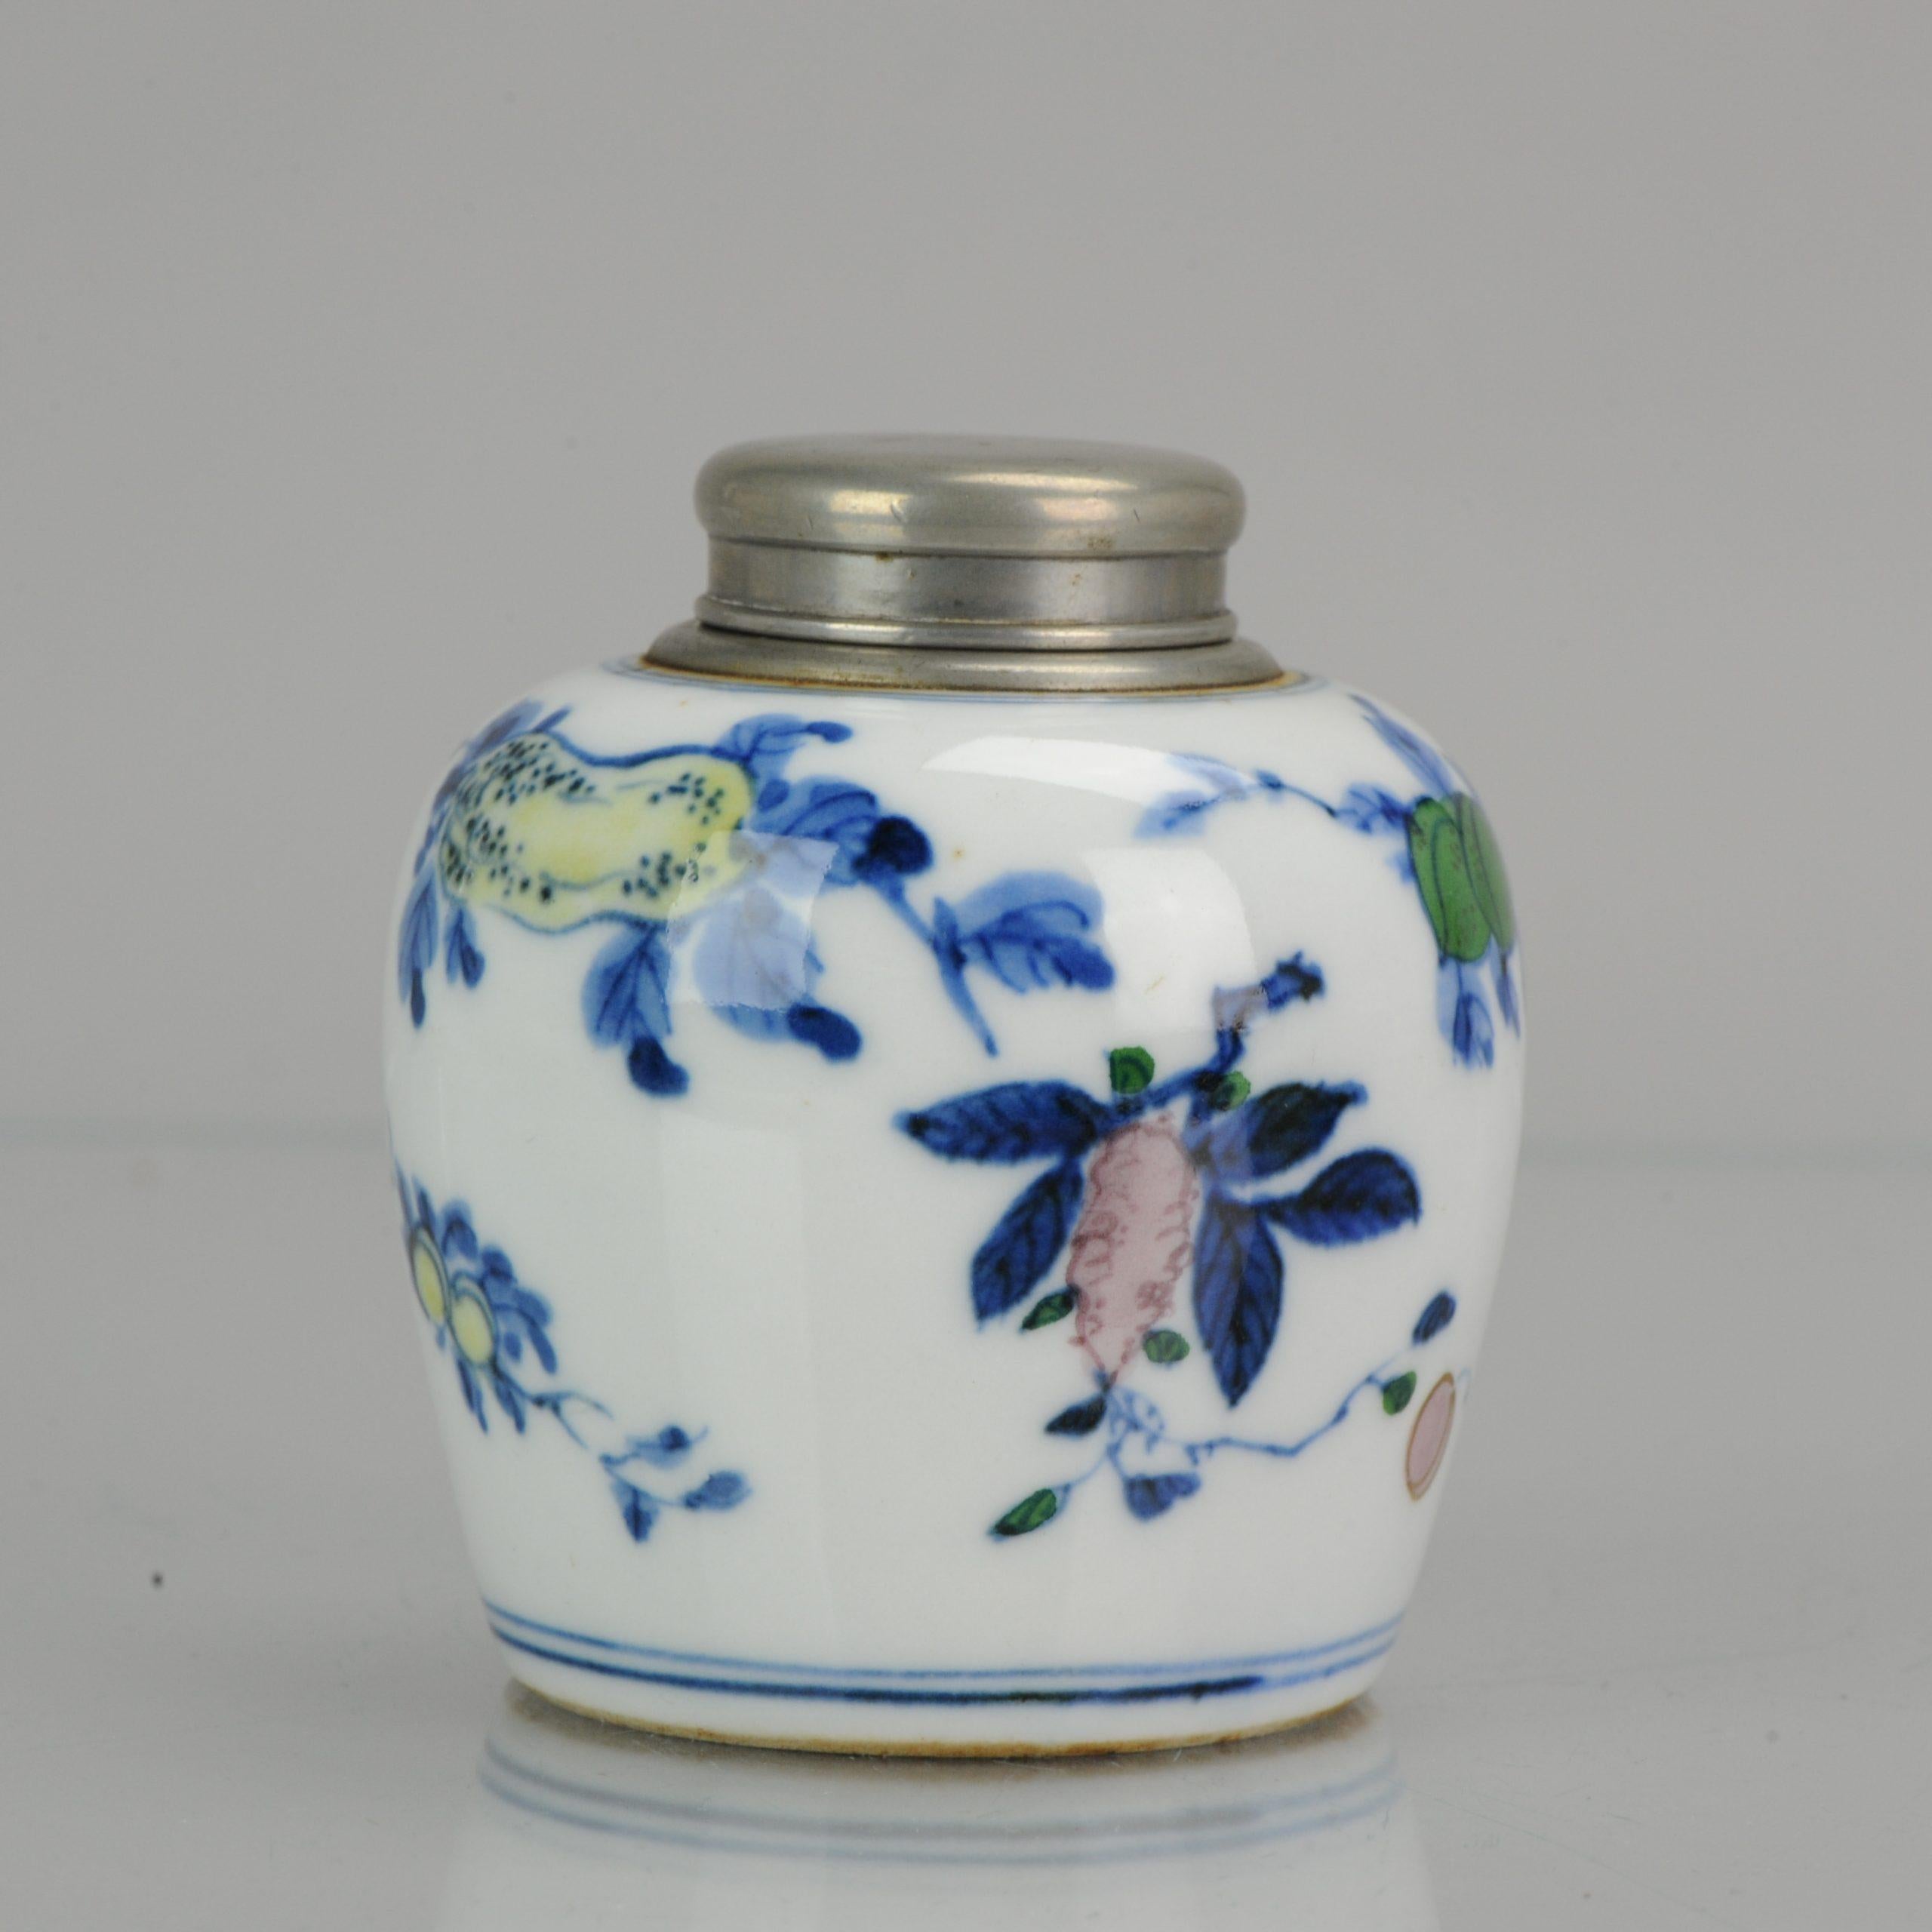 Antique 19th Century Porcelain Doucai Tea Caddy Marked Fruit Decoration Chinese 3